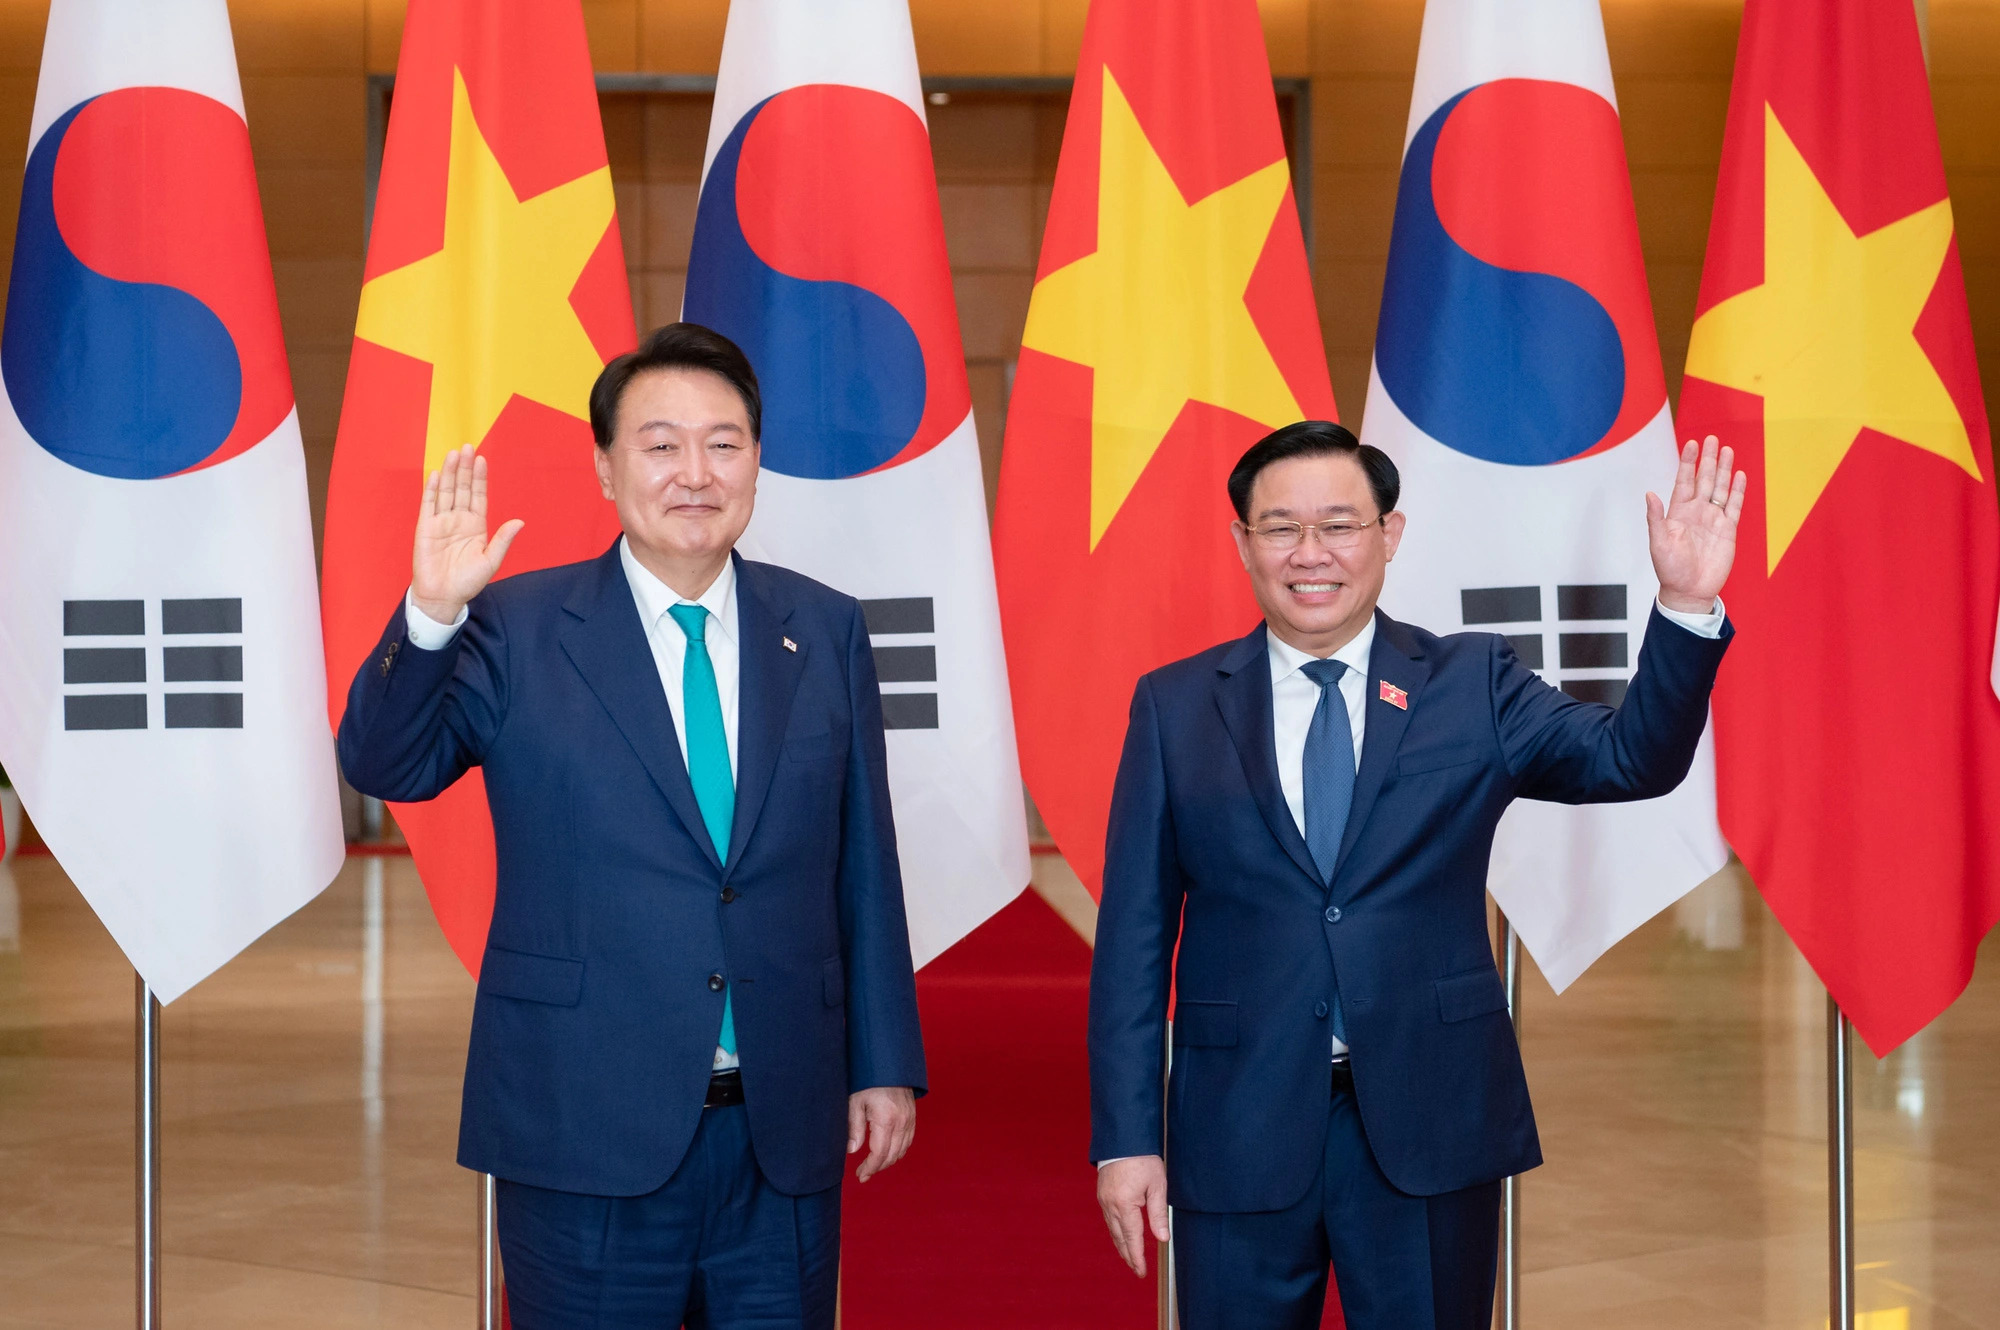 Vietnam’s National Assembly Chairman Vuong Dinh Hue (R) and South Korean President Yoon Suk Yeol (L) gesture during their talks in Hanoi on June 23, 2023. Photo: QUOCHOI.VN